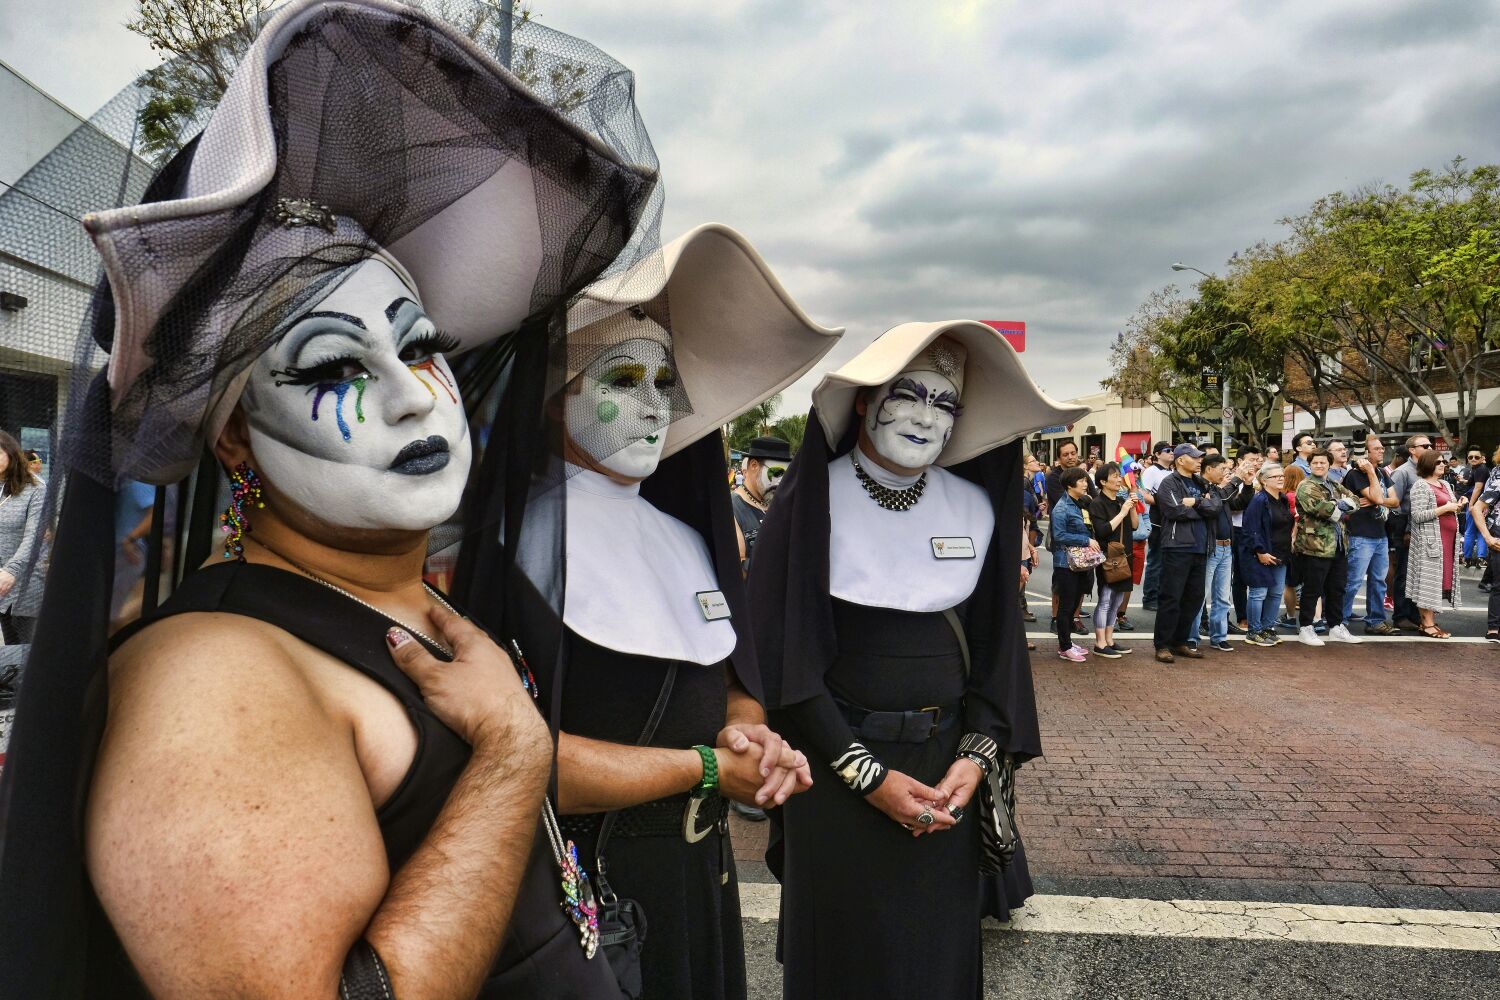 Granderson: The Dodgers faltered by disinviting the Sisters of Perpetual Indulgence but came to their senses